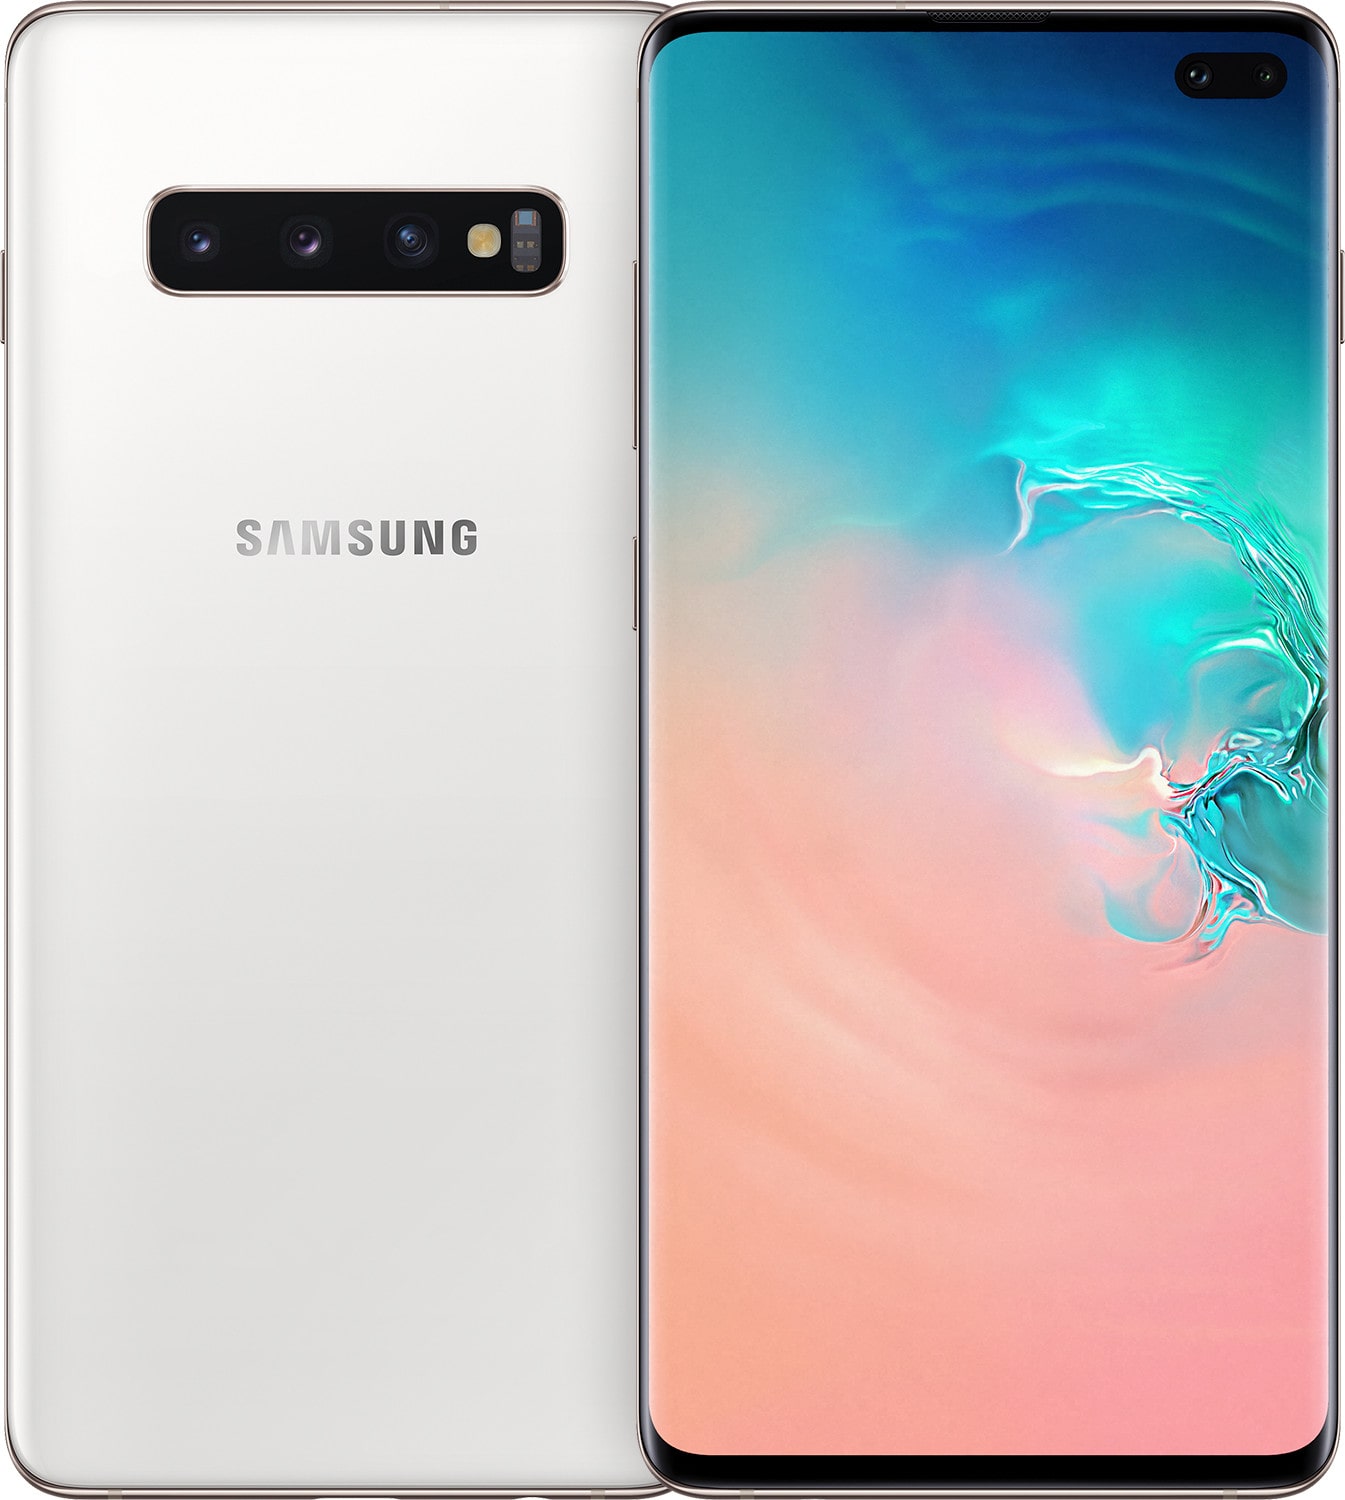 Samsung S10 Plus Price in Pakistan, New Features and ...